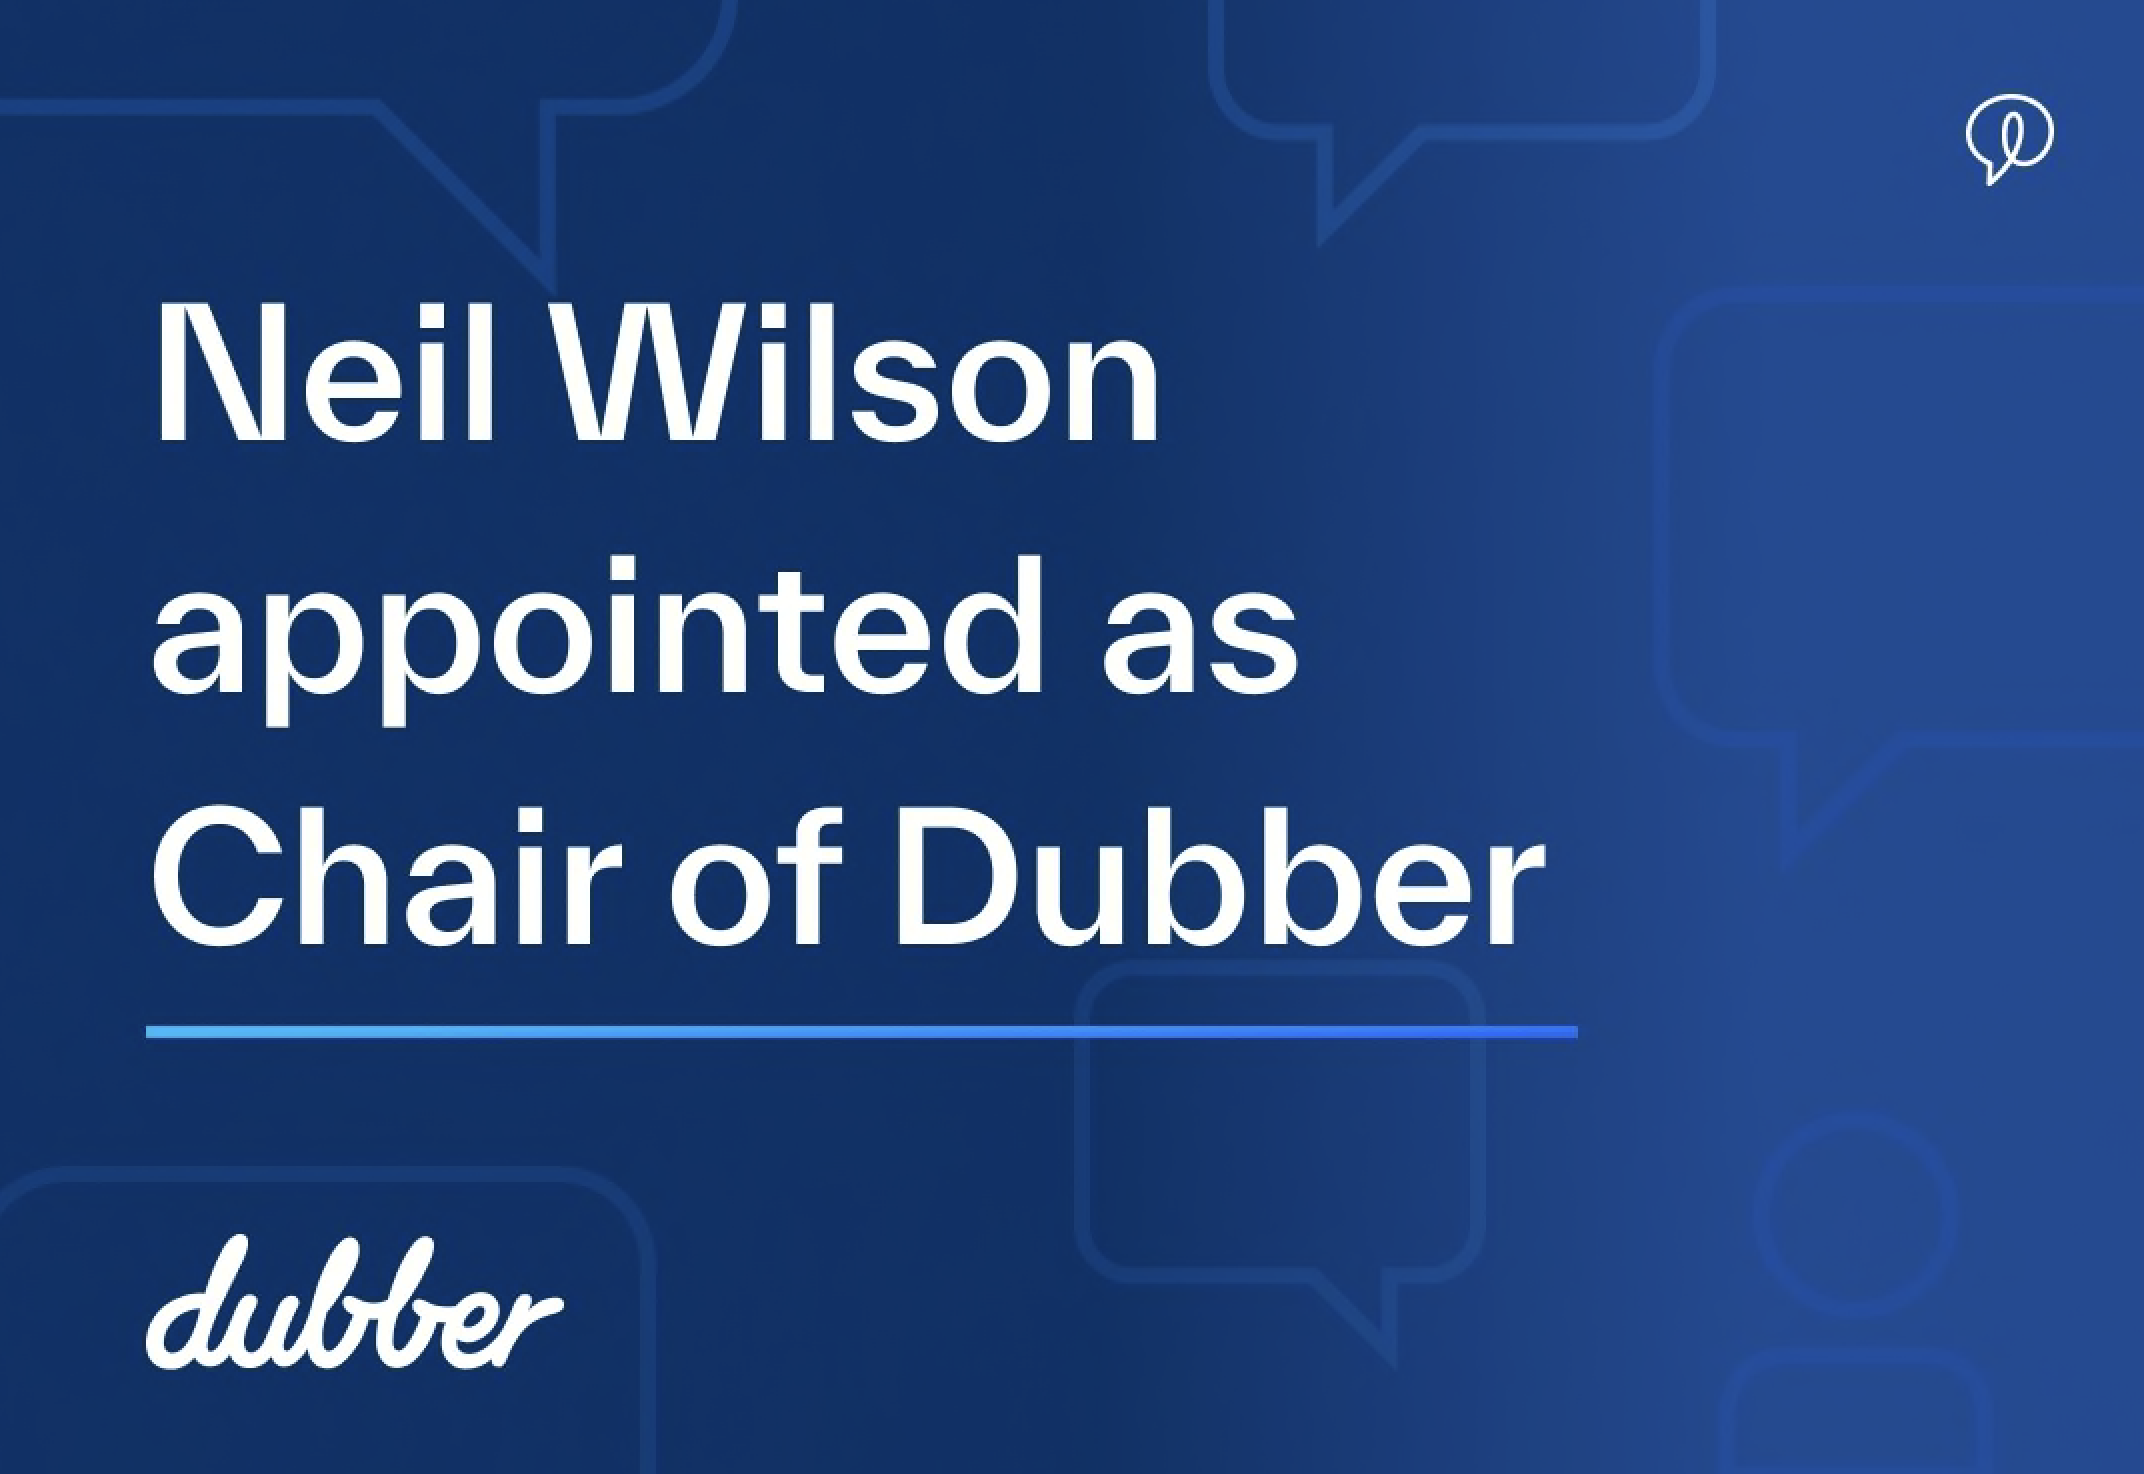 Neil Wilson appointed as Chair of Dubber